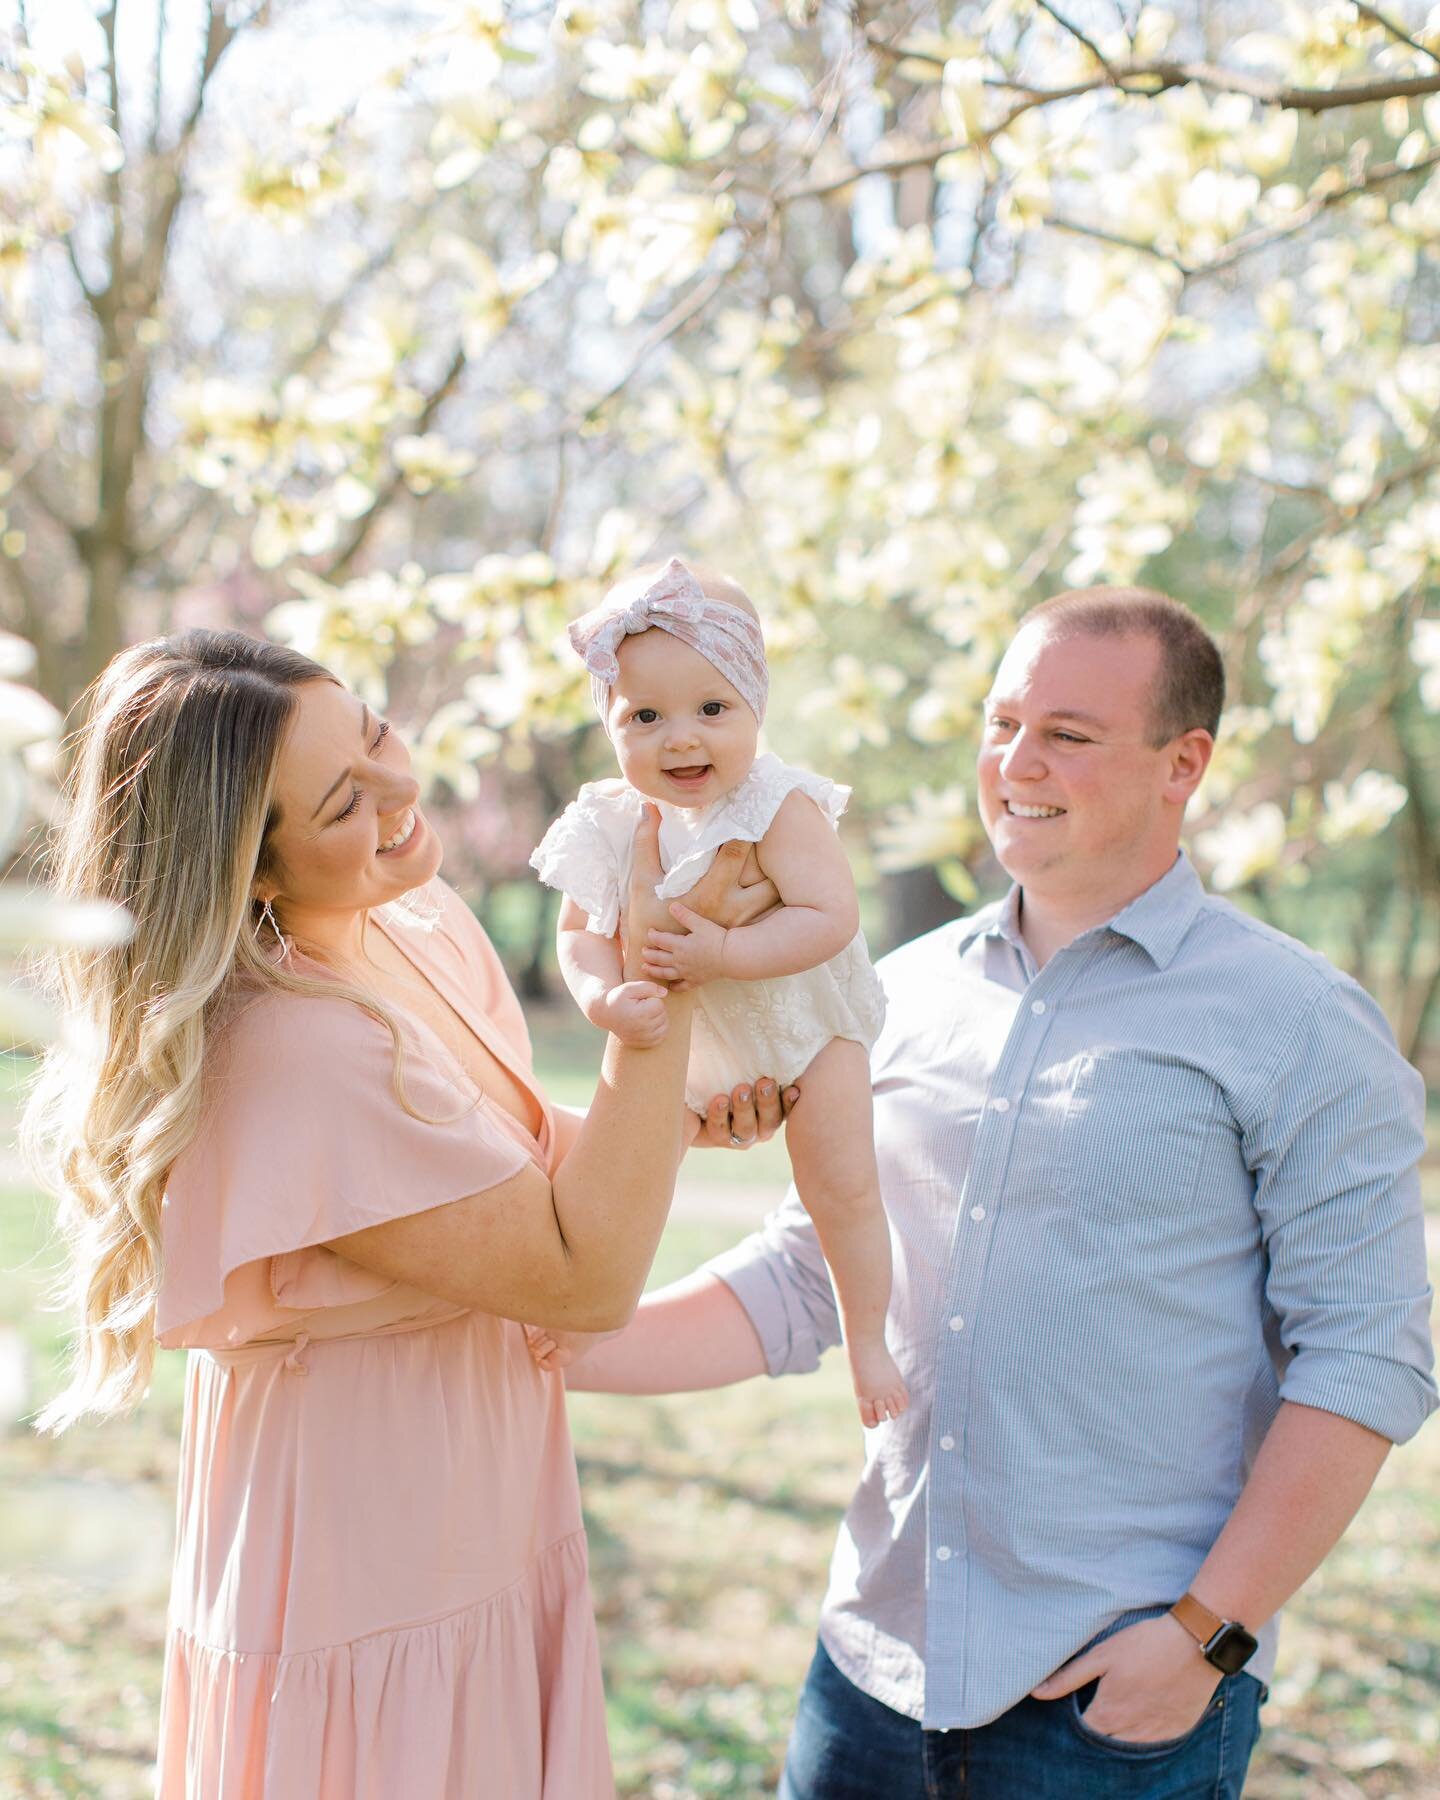 🌸SPRING MINIS!🌸 I wanted to put out a reminder that I have slots open on May 20th for spring mini sessions if you&rsquo;re interested. These were originally scheduled in April, but my little babe came 4 weeks early&hellip; so I had to reschedule. W